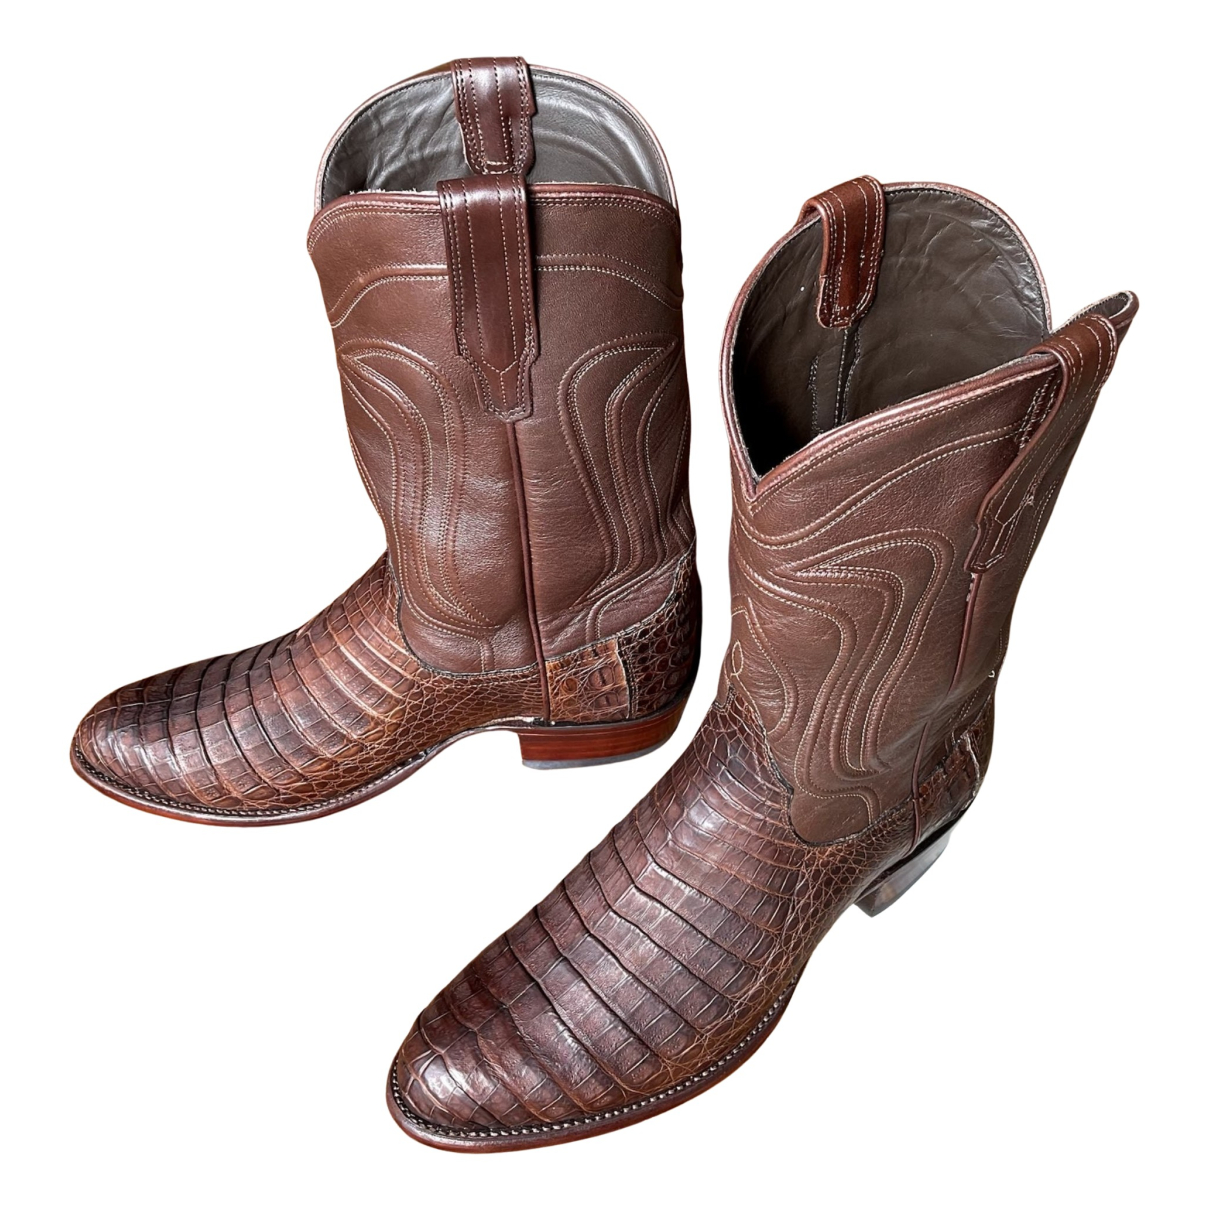 Tecovas Leather boots | Vestiaire Collective (Global)